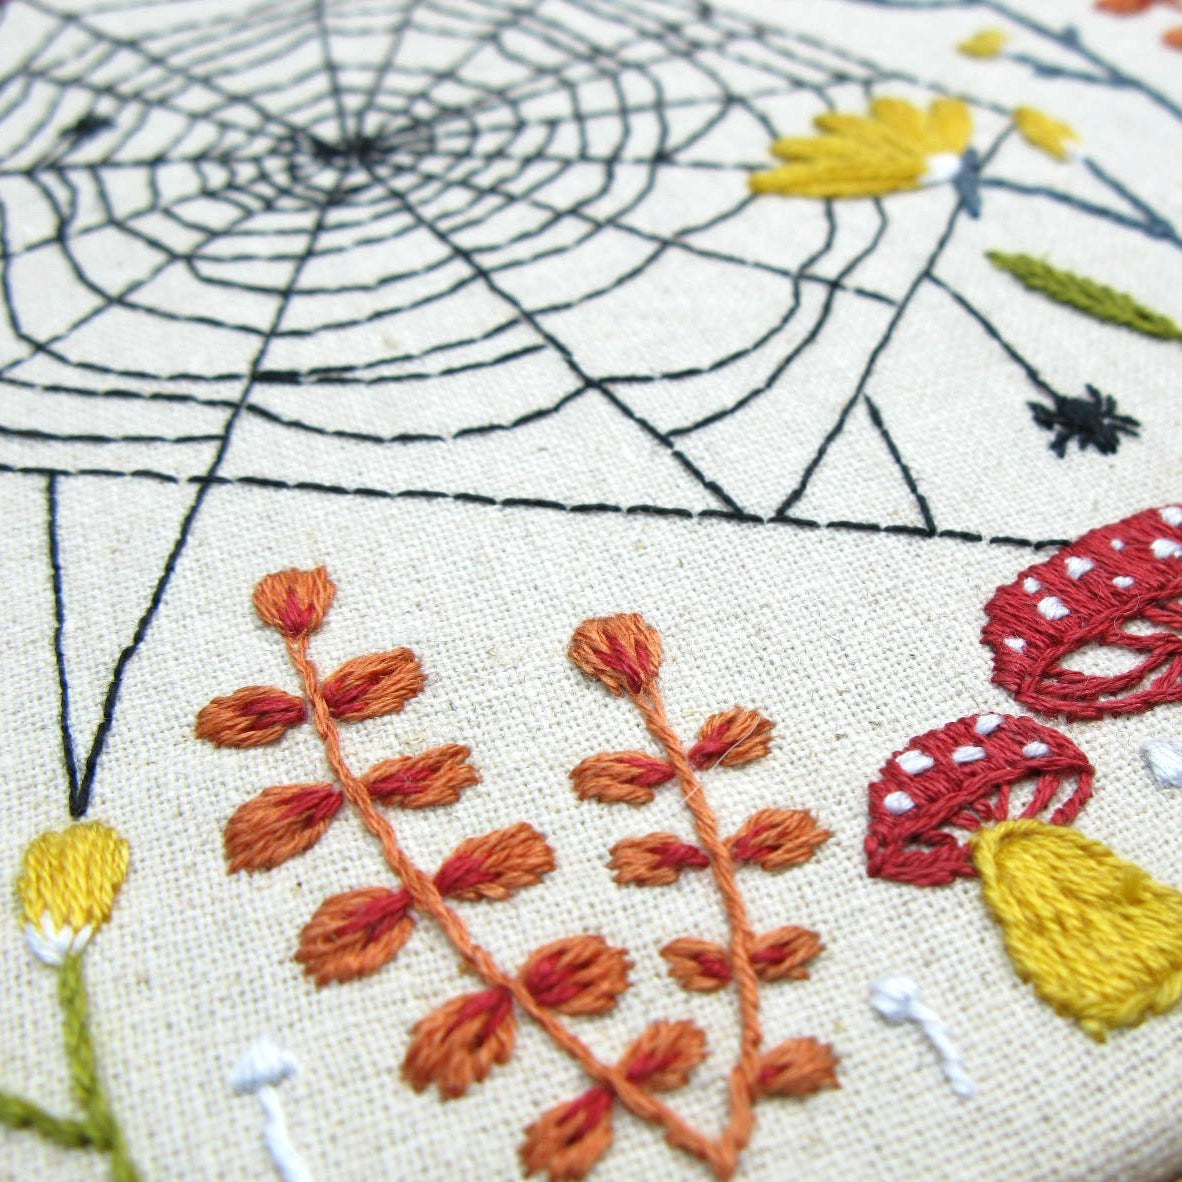 Woven embroidery kit